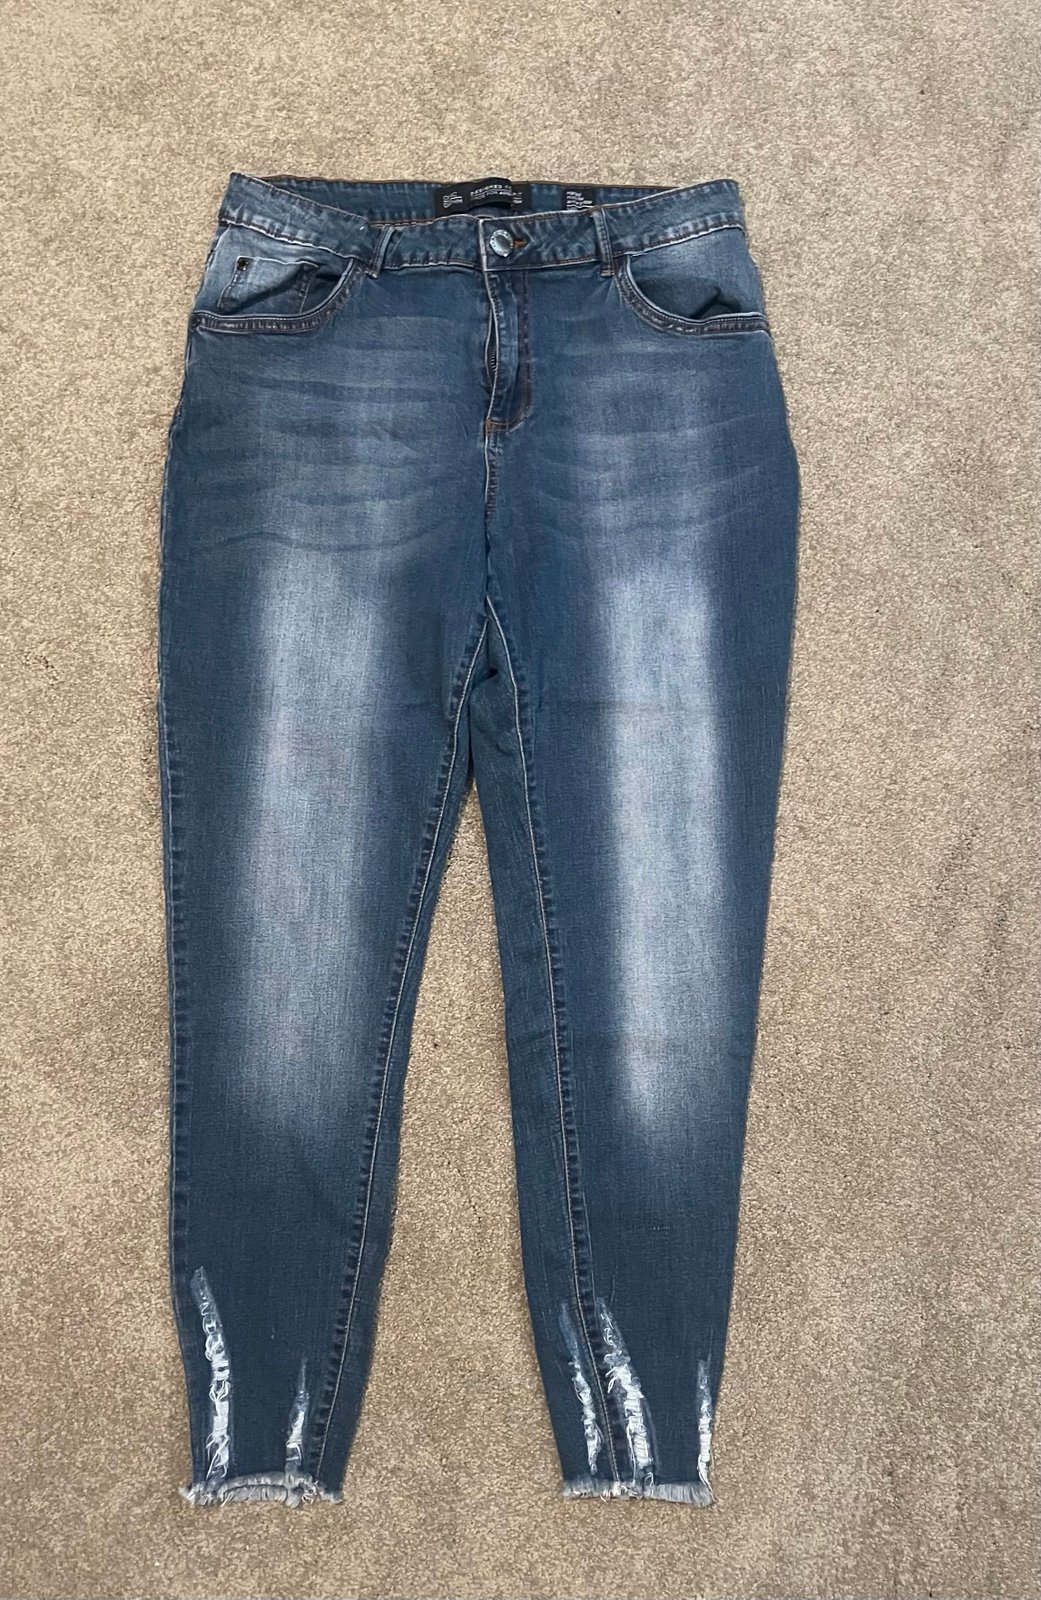 Gorgeous City Chic Harley Skinny Jeans 14 ju03lf945 Buying Cheap